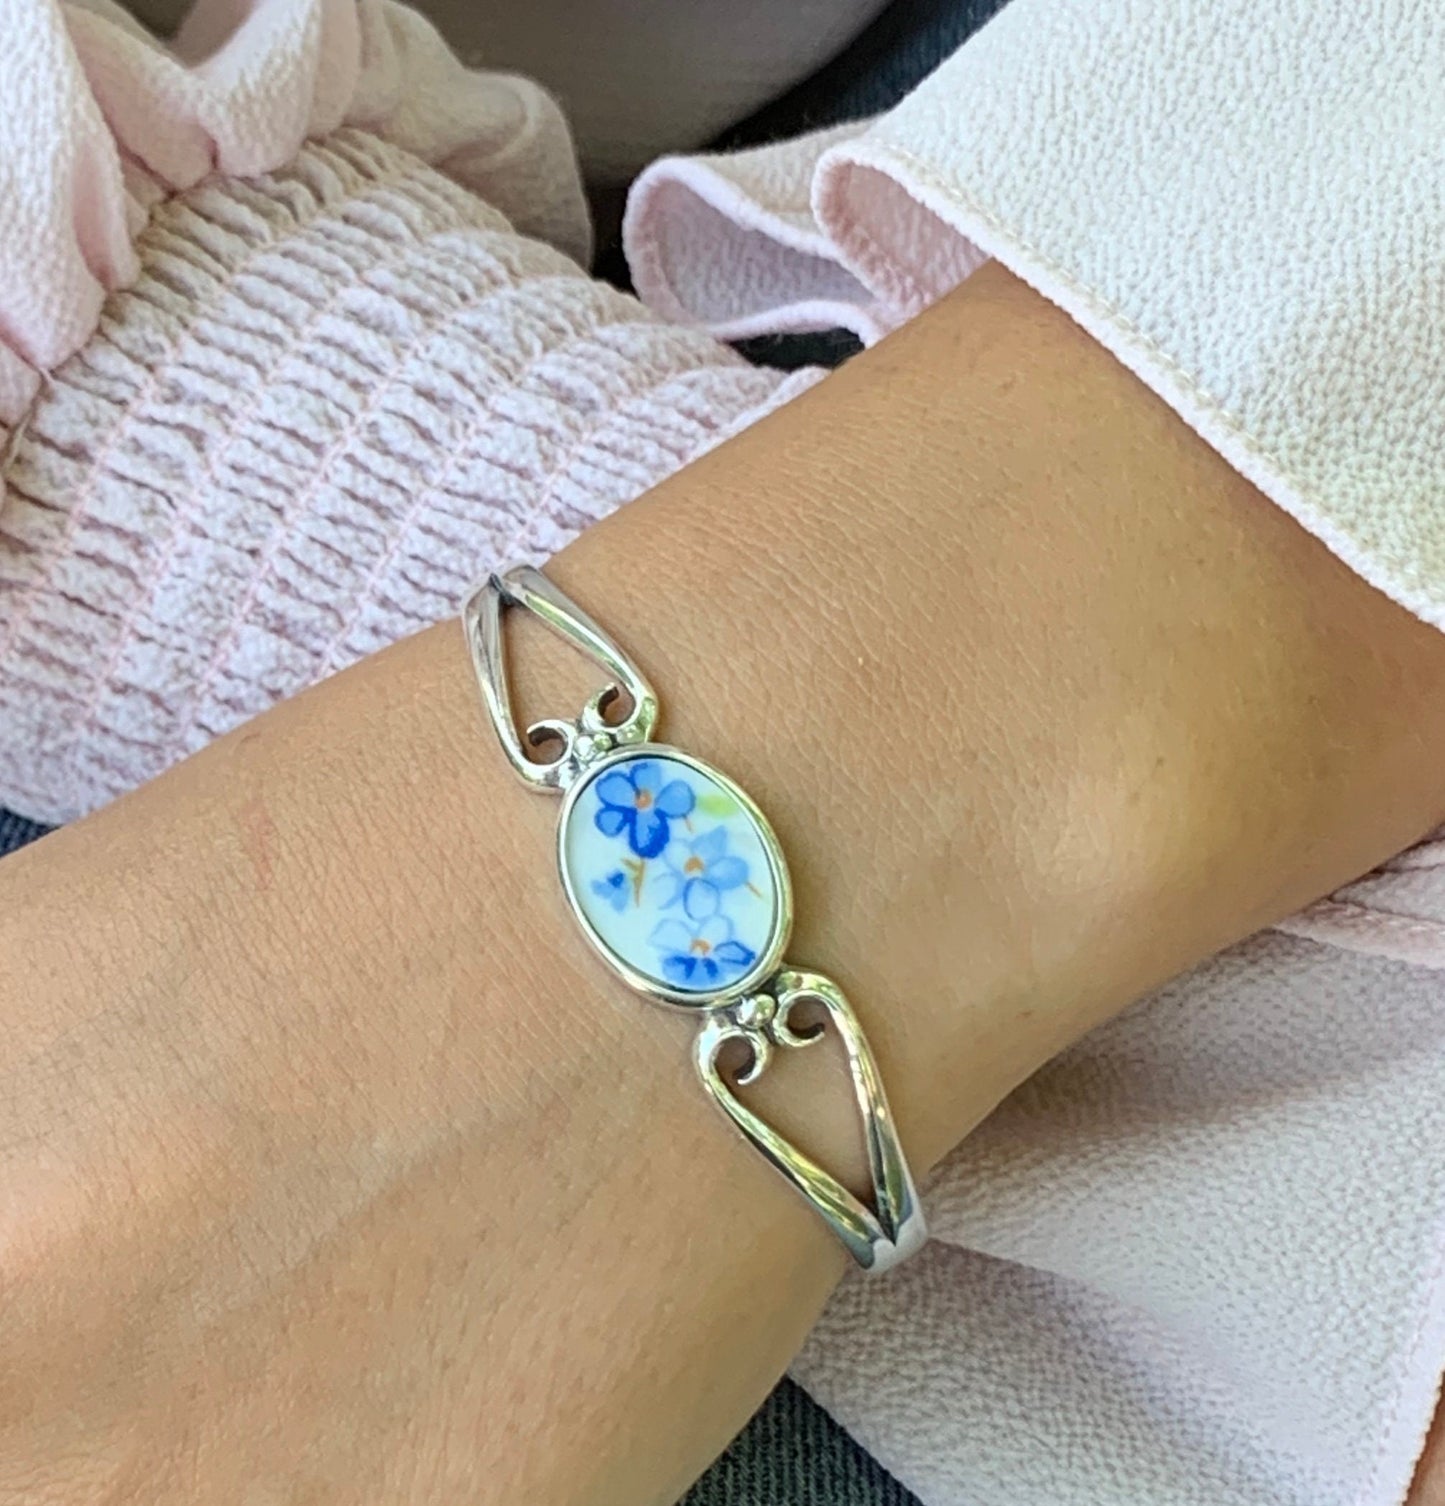 Broken China Forget Me Not Flower Bracelet, Birthday Gift, 20th Anniversary Gift for Wife, Repurposed Jewelry, Unique Gifts for Women